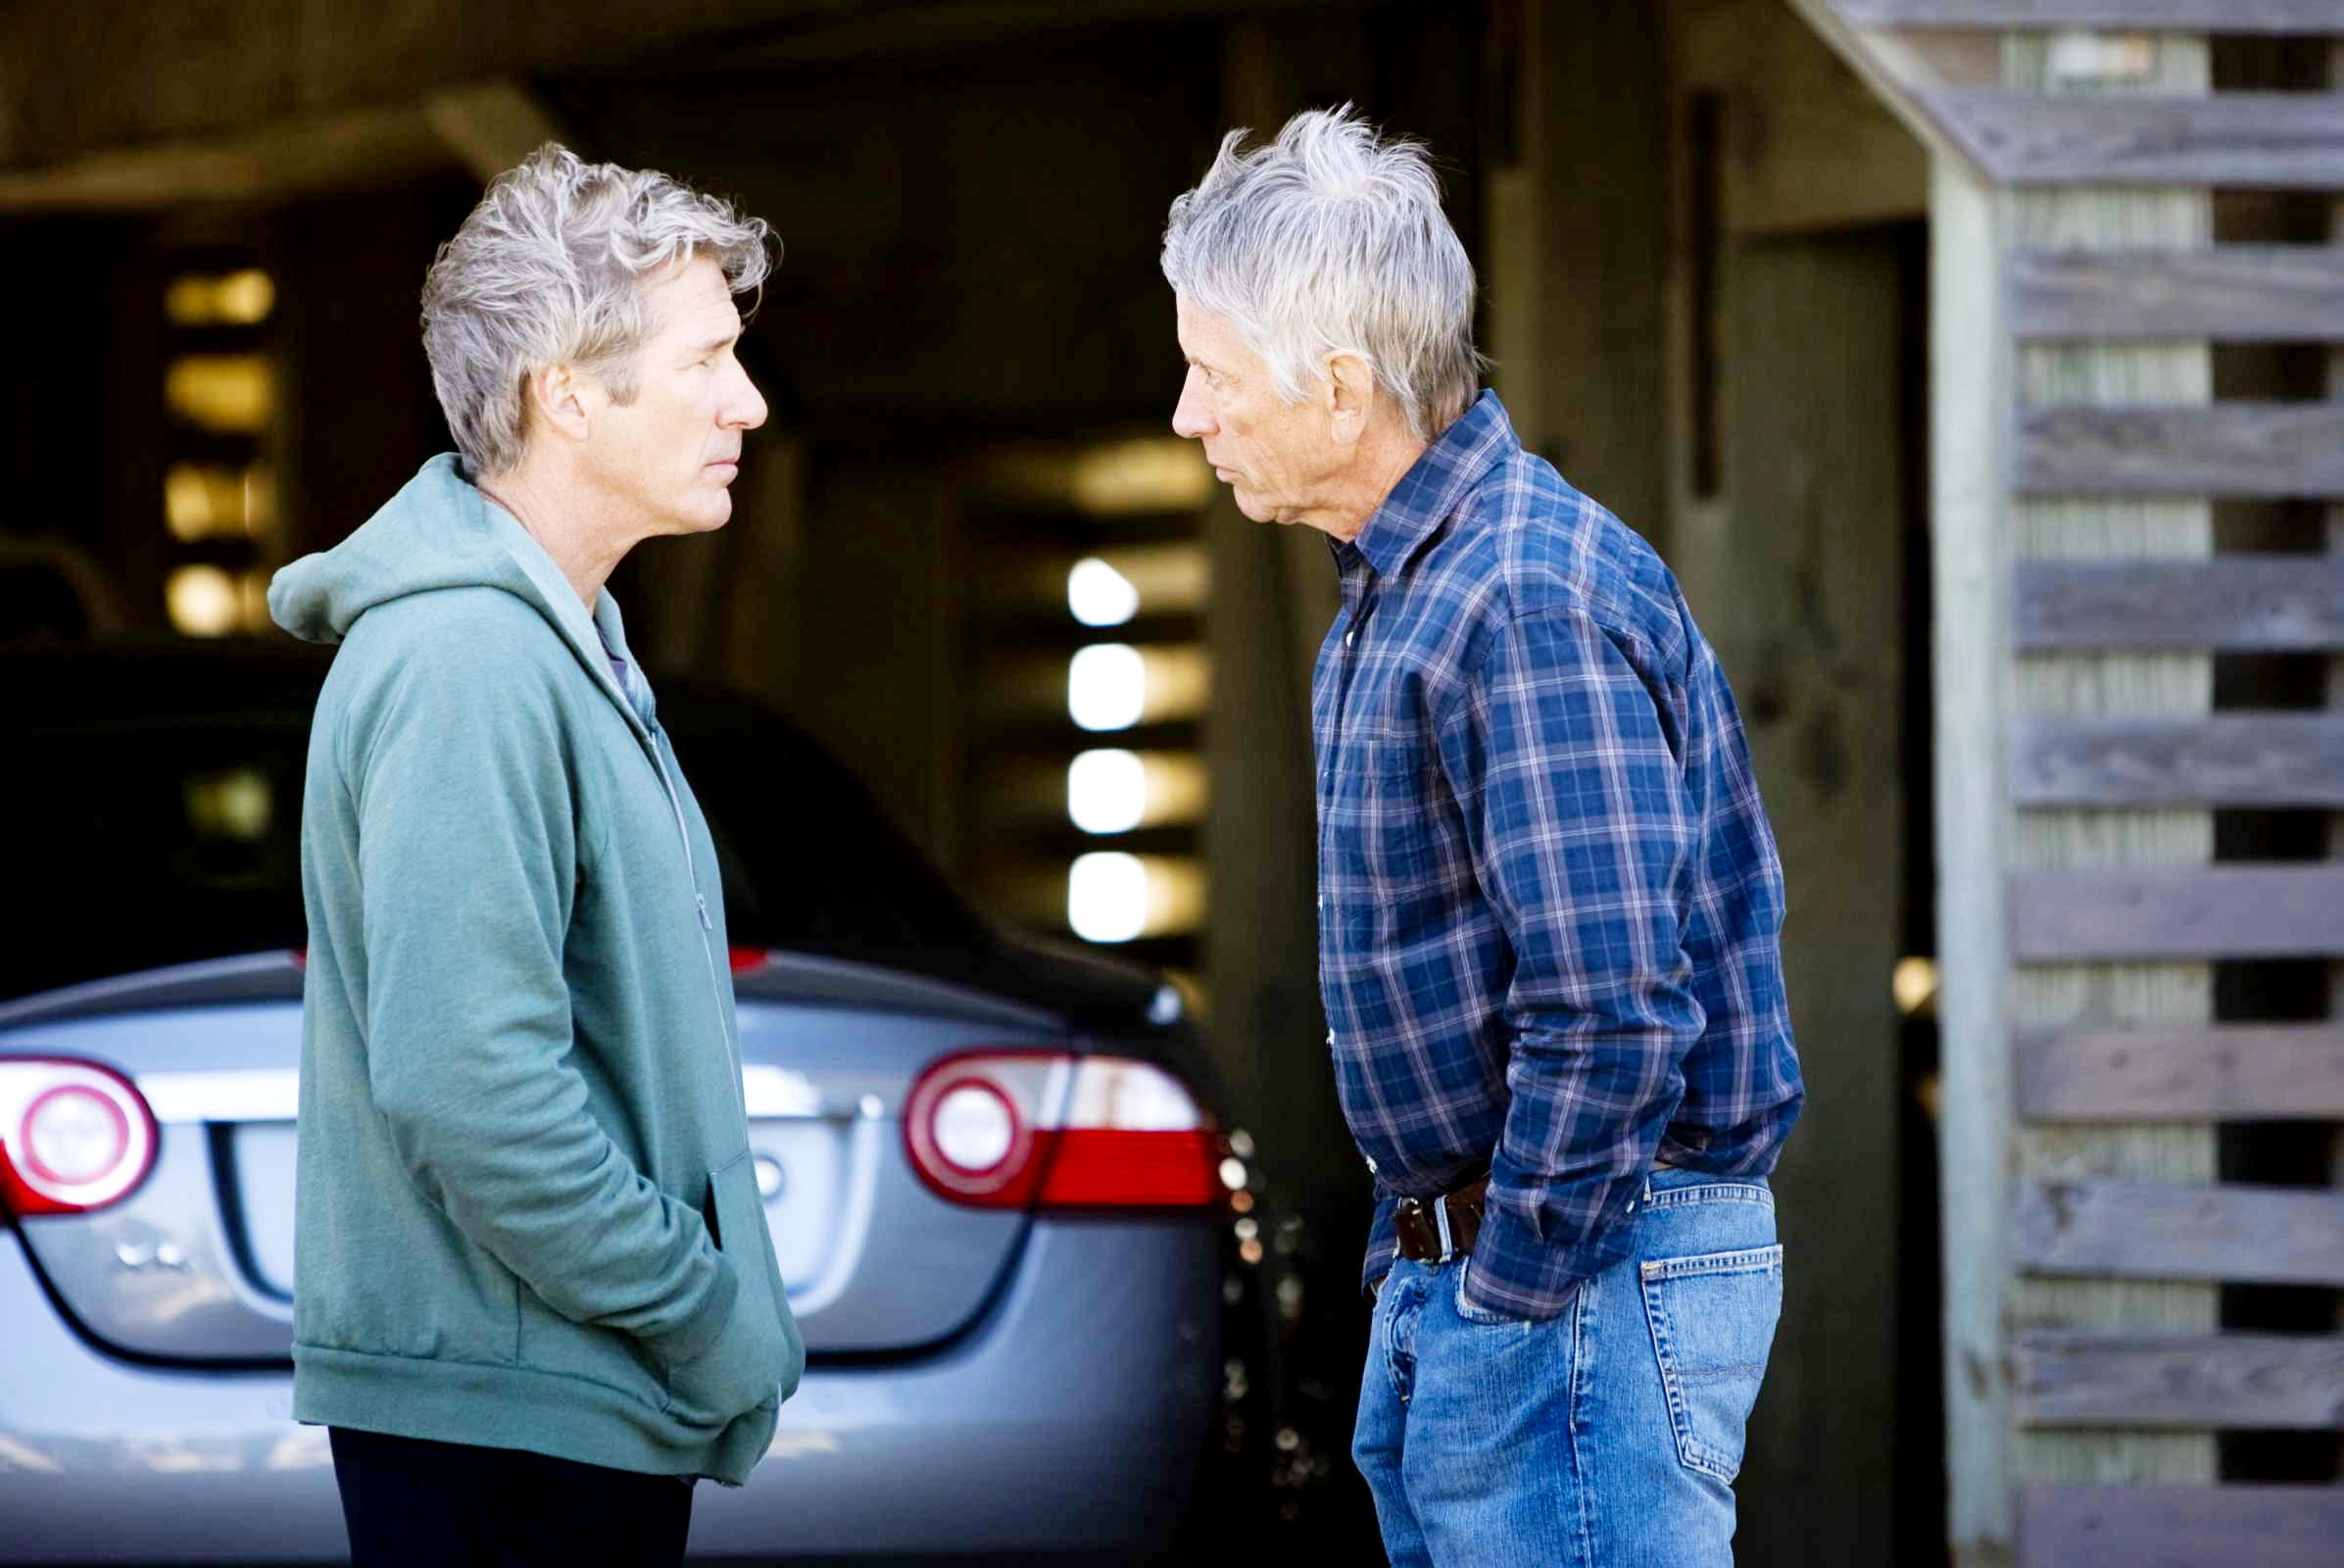 Richard Gere stars as Dr. Paul Flanner and Scott Glenn stars as Robert Torrelson in Warner Bros. Pictures' Nights in Rodanthe (2008). Photo credit by Michael Tackett.